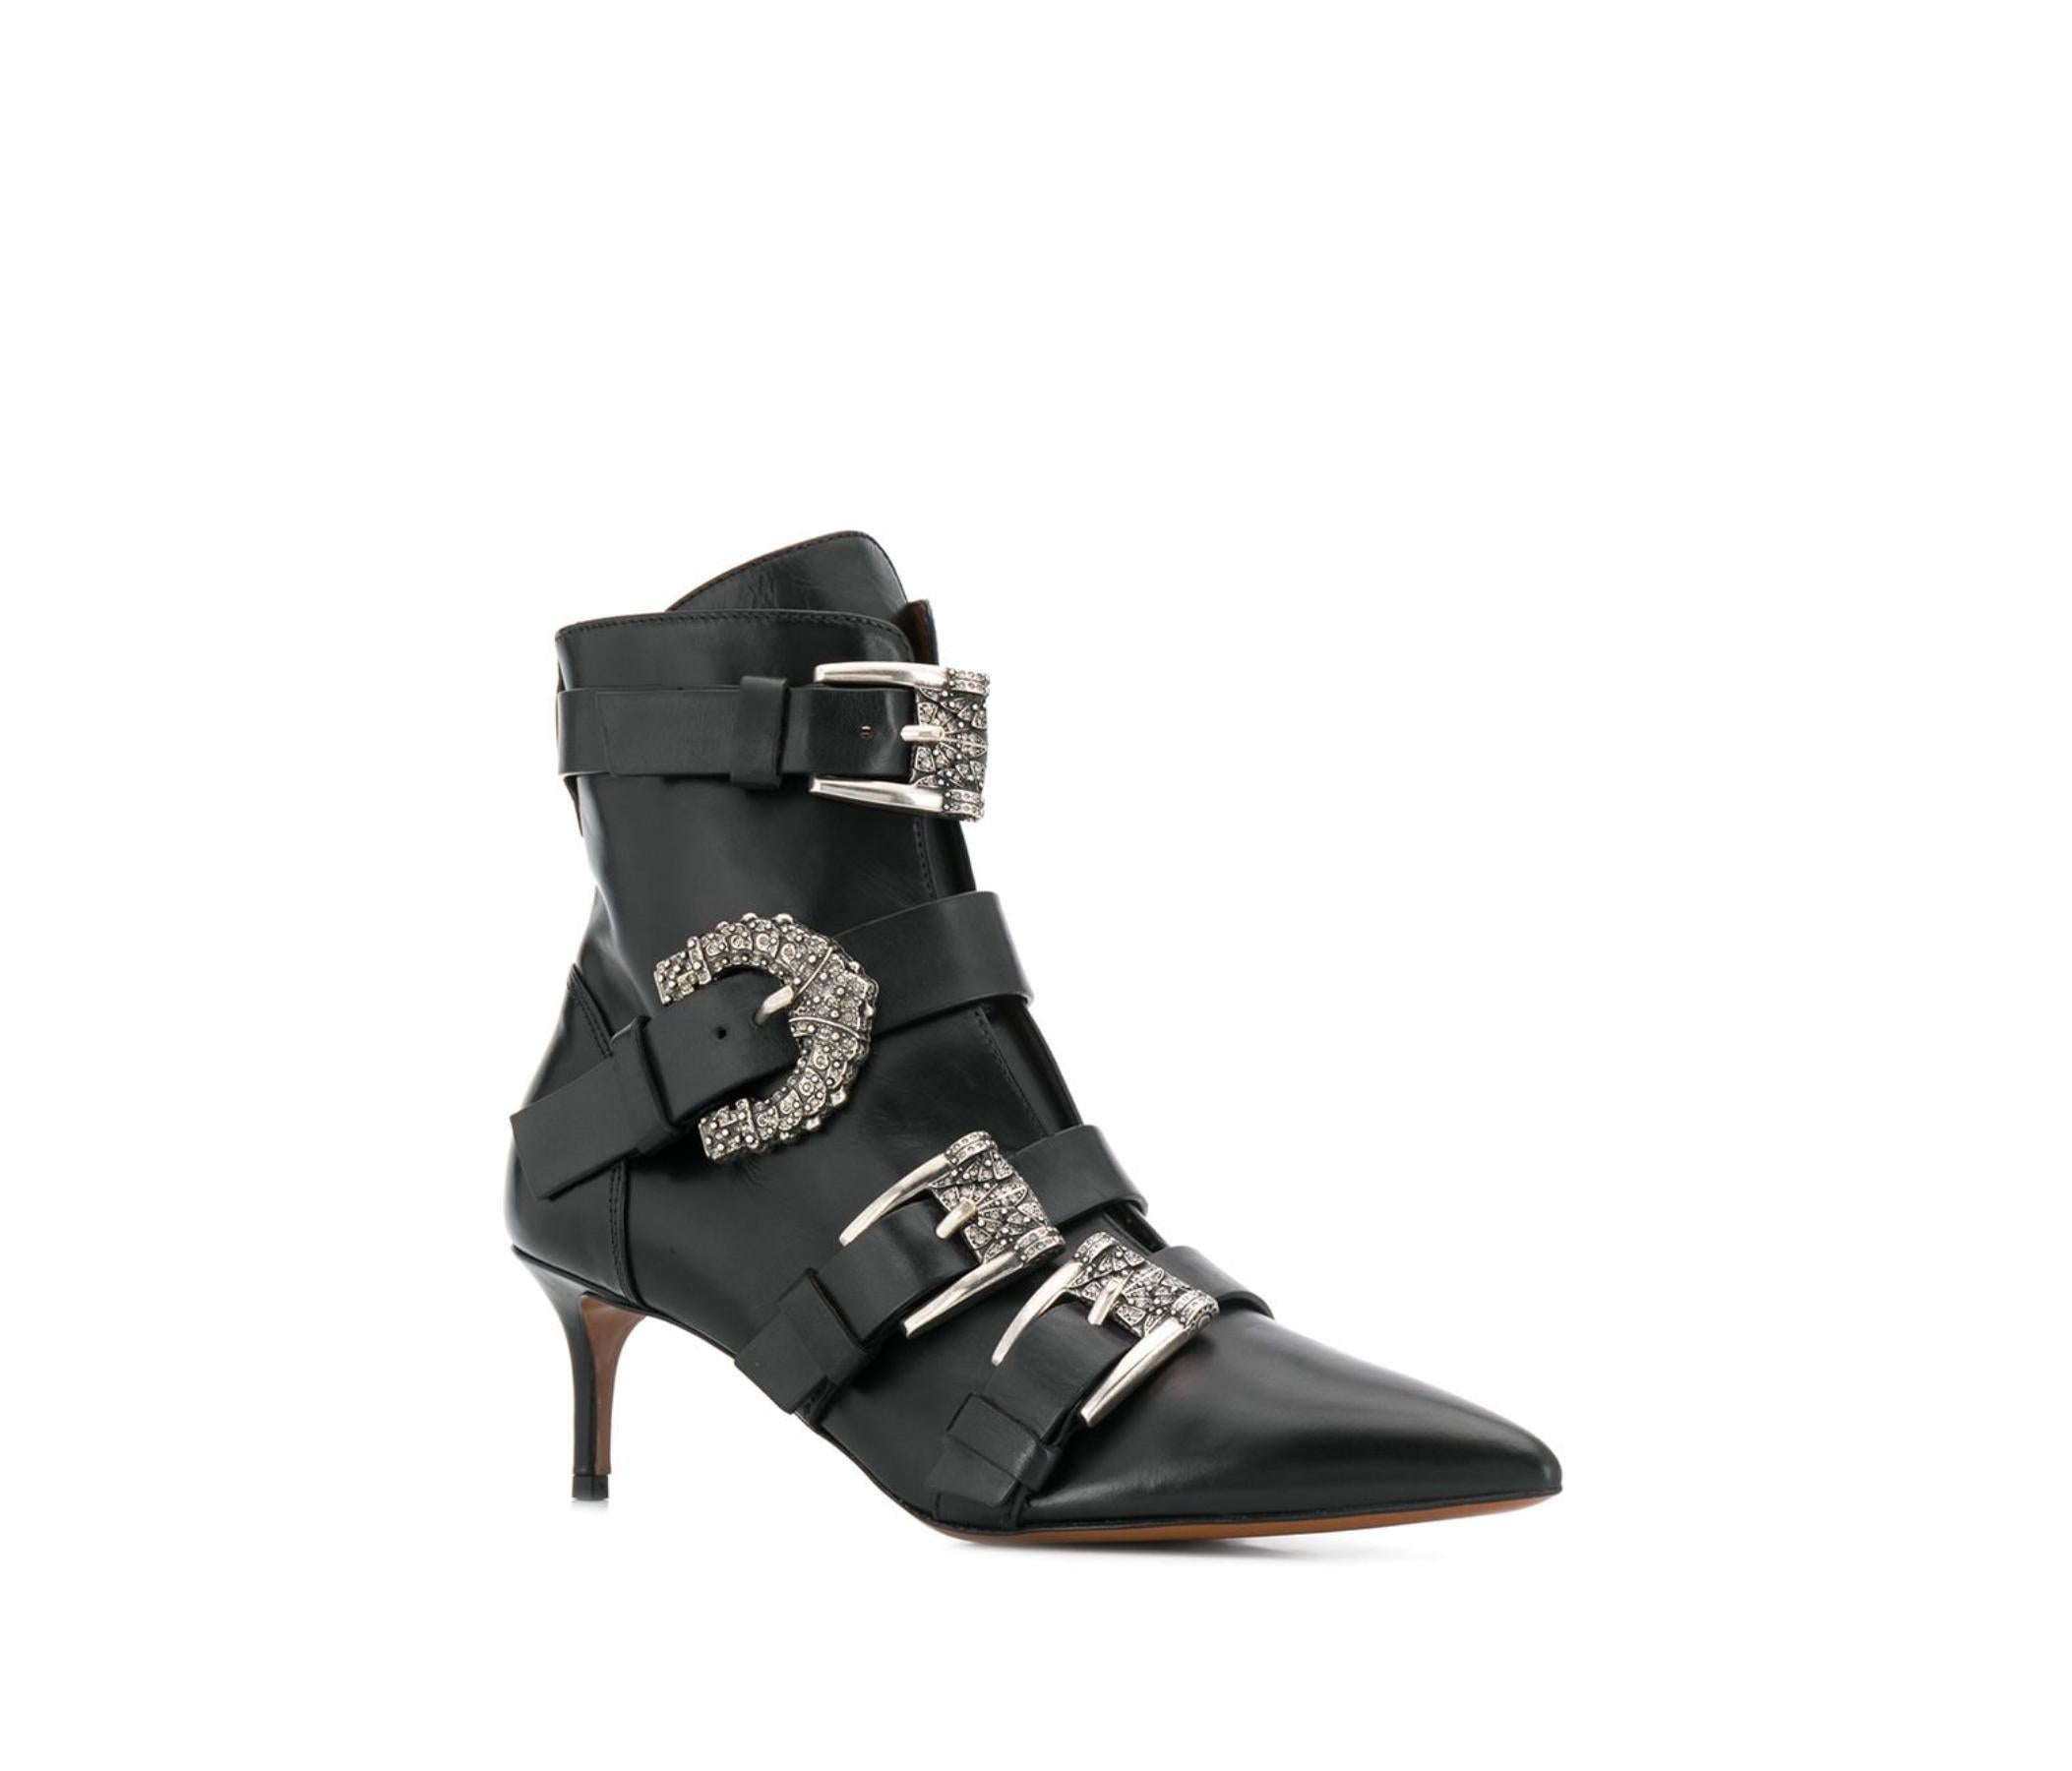 The Etro Fall 2019 Runway side buckle black leather ankle boots features embellished buckles, a pointed toe, and 2.4 inch heel. Brand new with shoebox included. Made in Italy.

Size: 36 (IT)

Measurements (taken from Italian size 39):
Circumference: